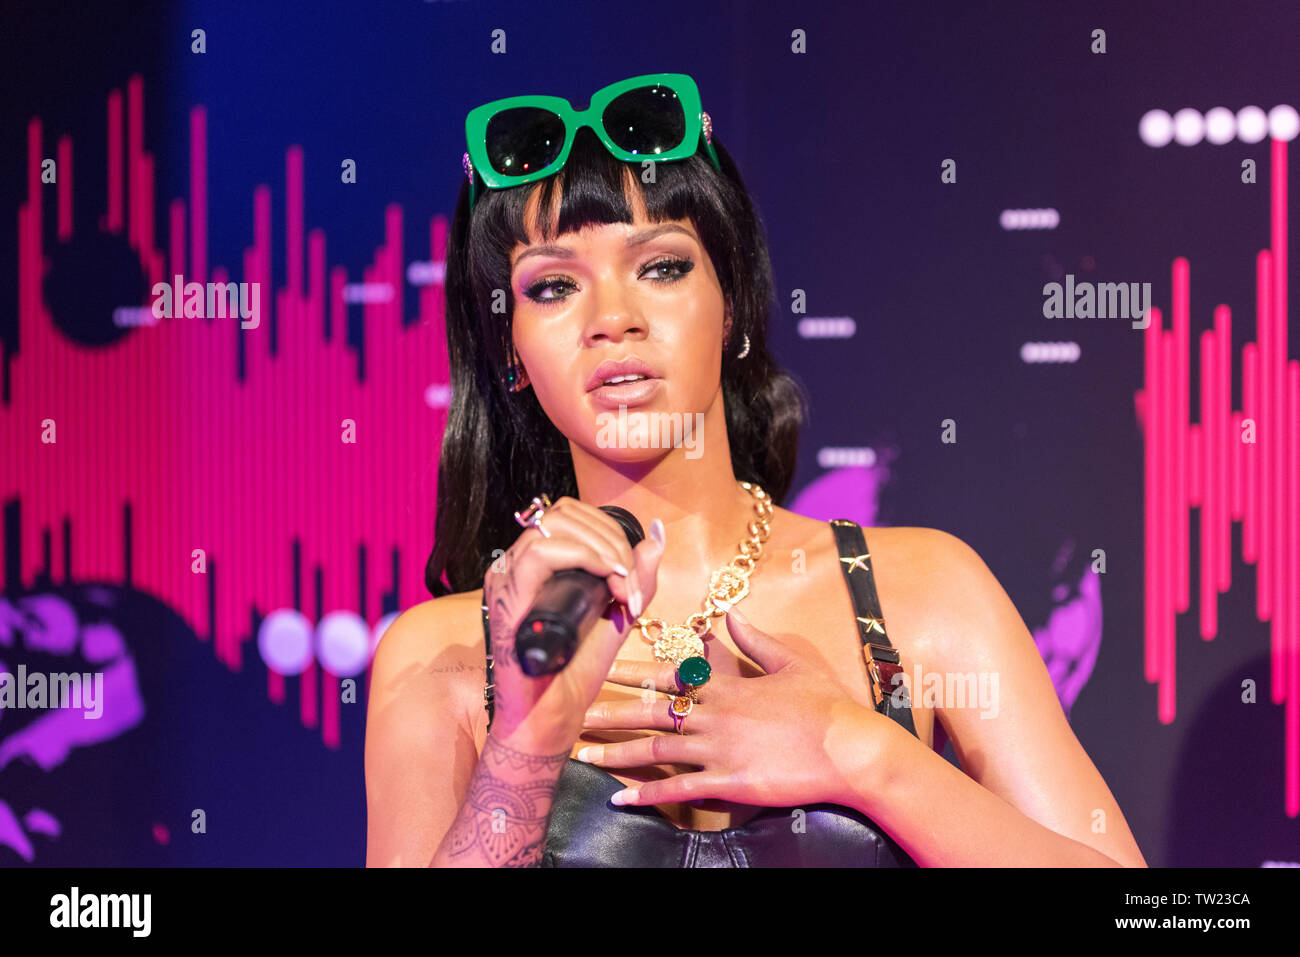 ISTANBUL, TURKEY - MARCH 16, 2017: Rihanna wax figure at Madame Tussauds  museum in Istanbul. Stock Photo